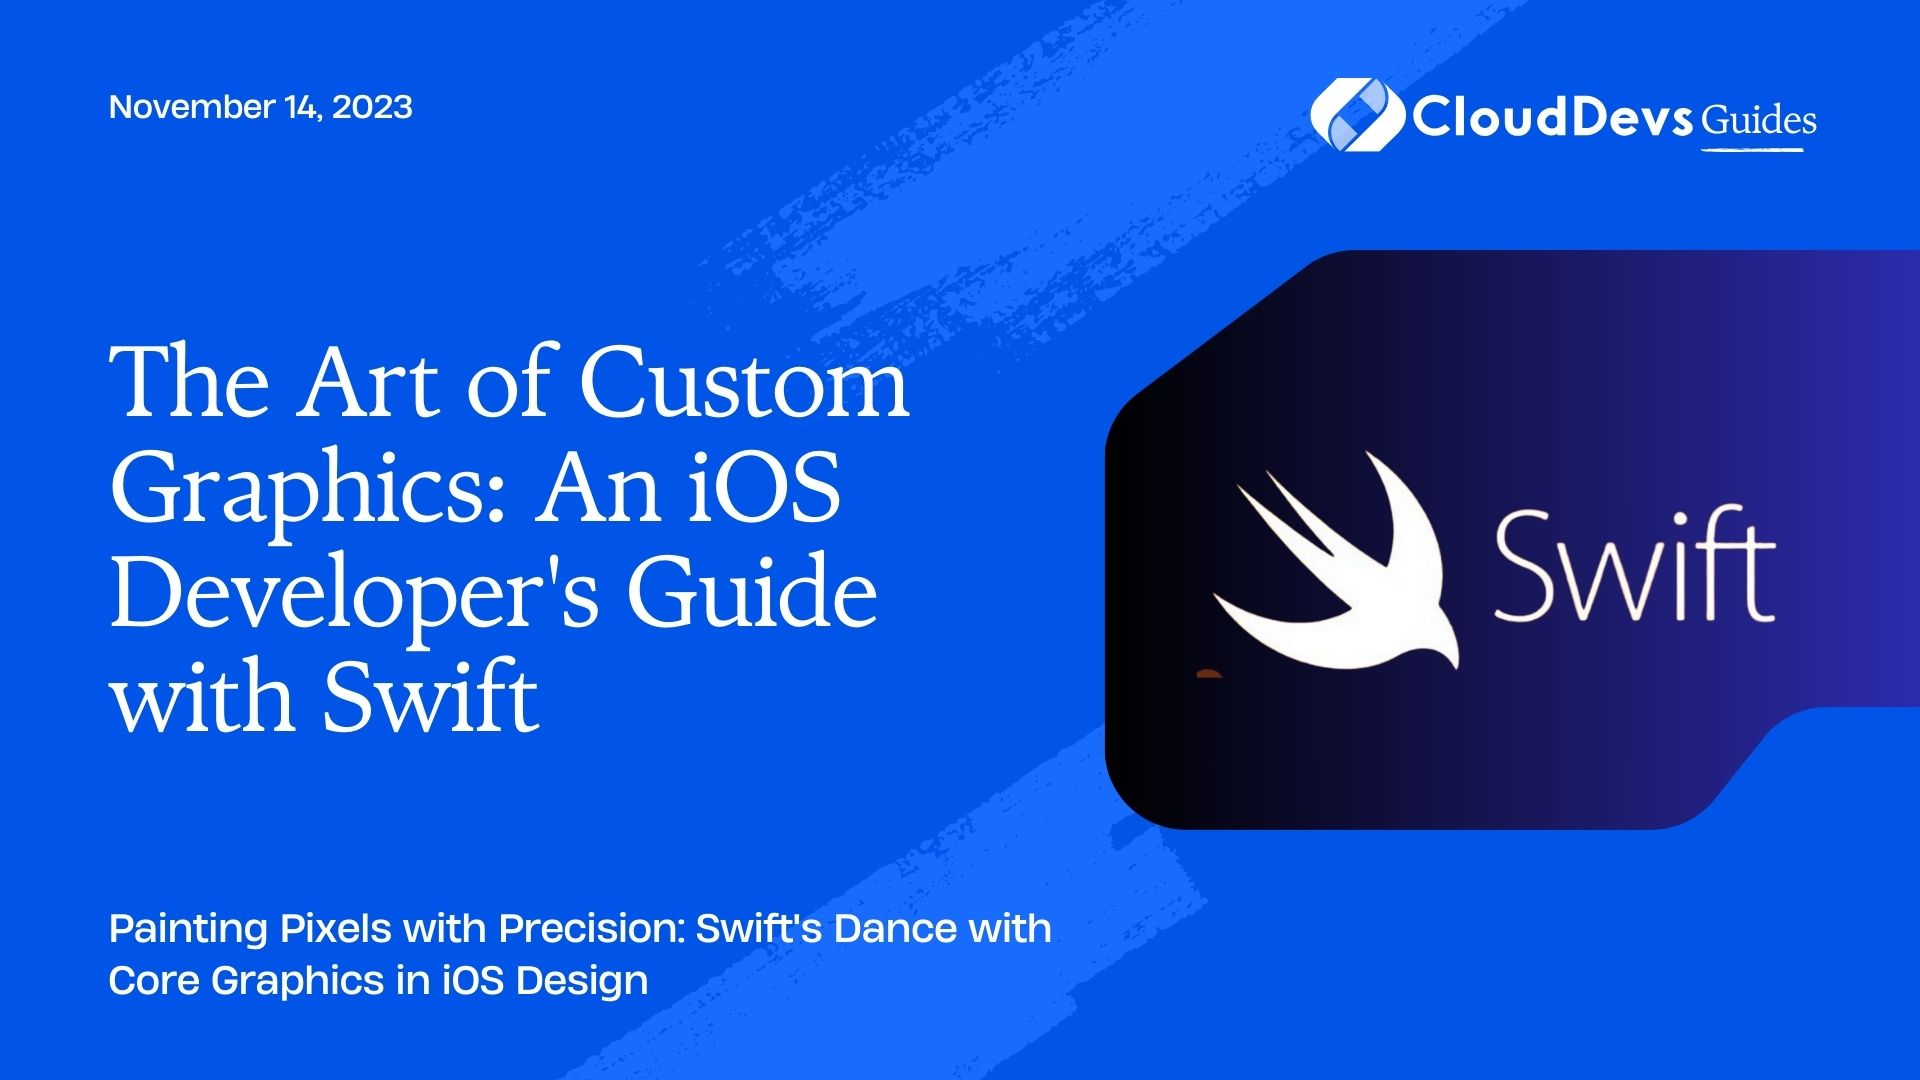 The Art of Custom Graphics: An iOS Developer's Guide with Swift